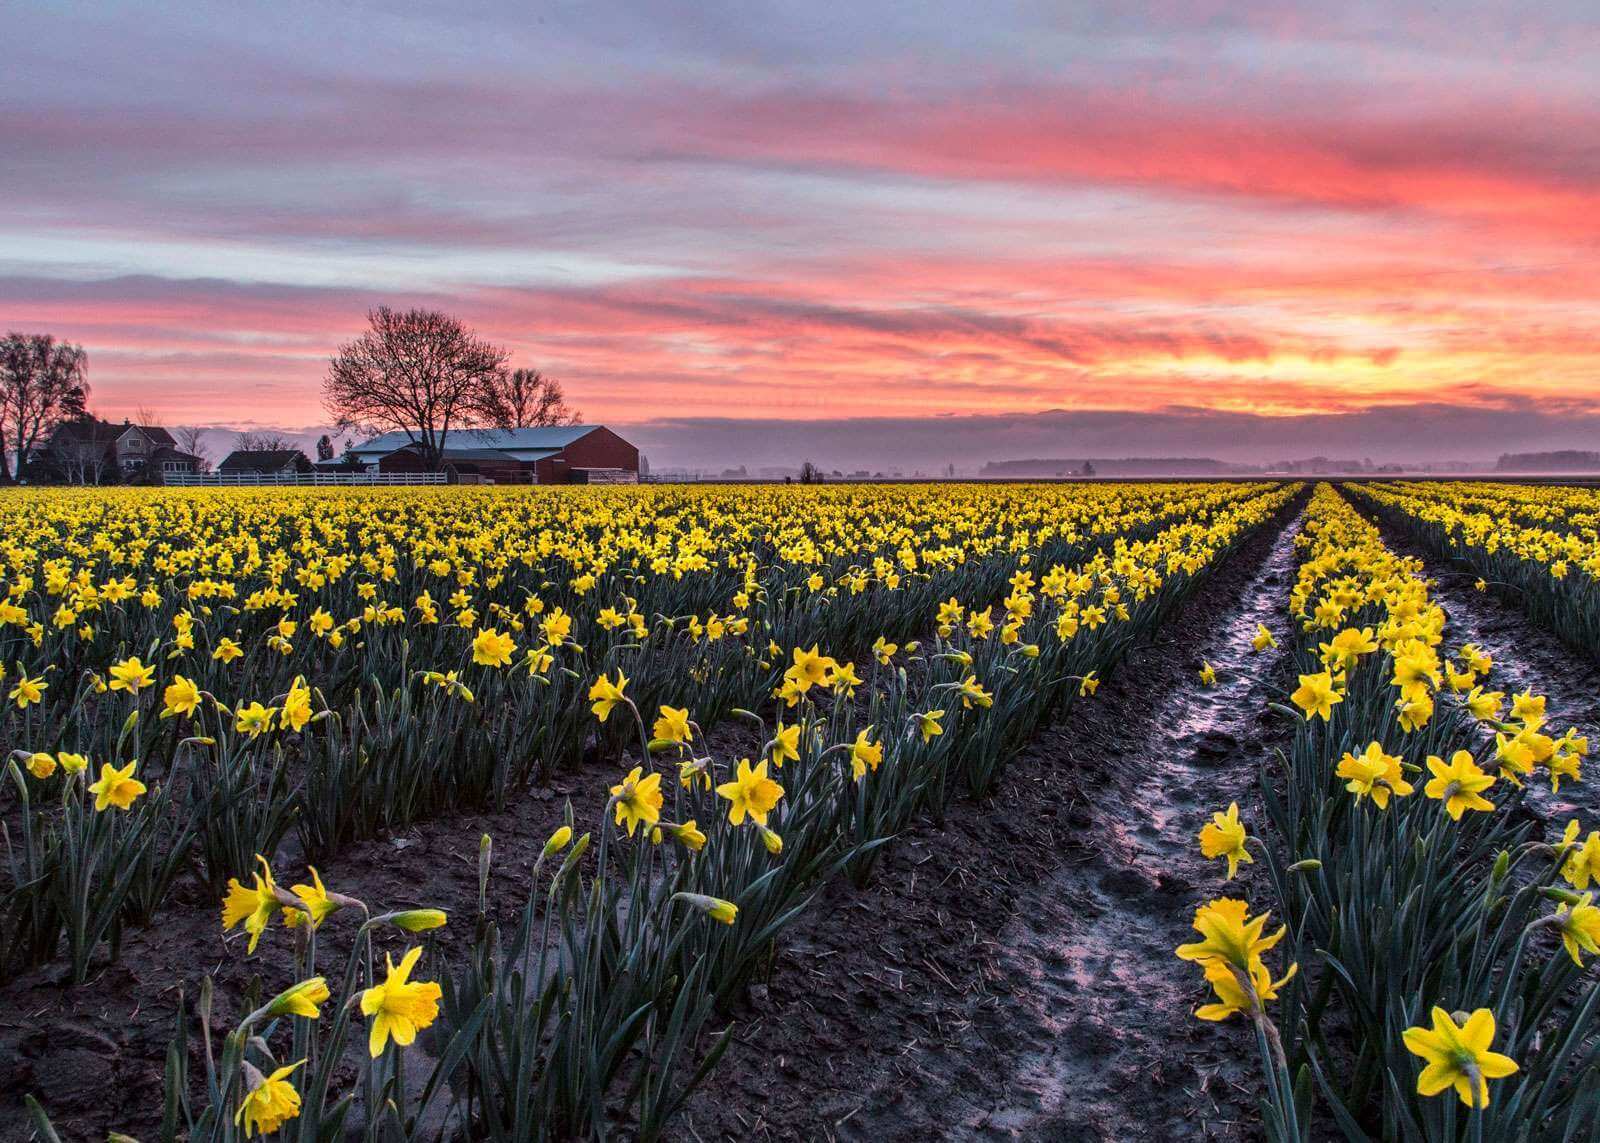 Field of daffodils in the Skagit Valley with a farm in the background